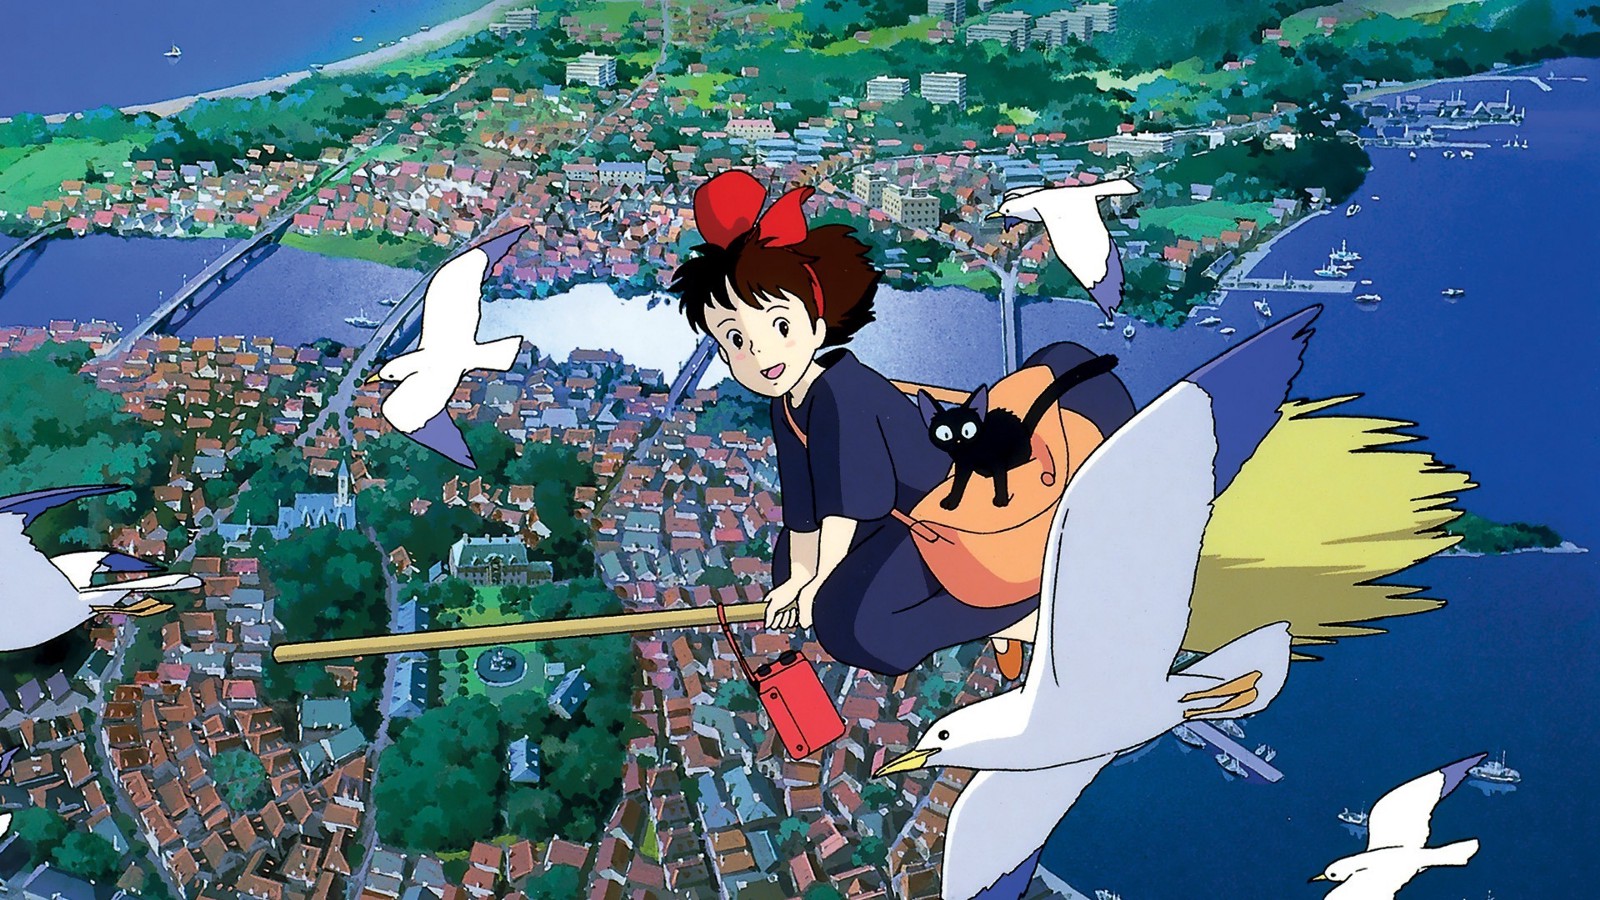 Studio Ghibli The Japanese Animation Powerhouse That Conquered the World